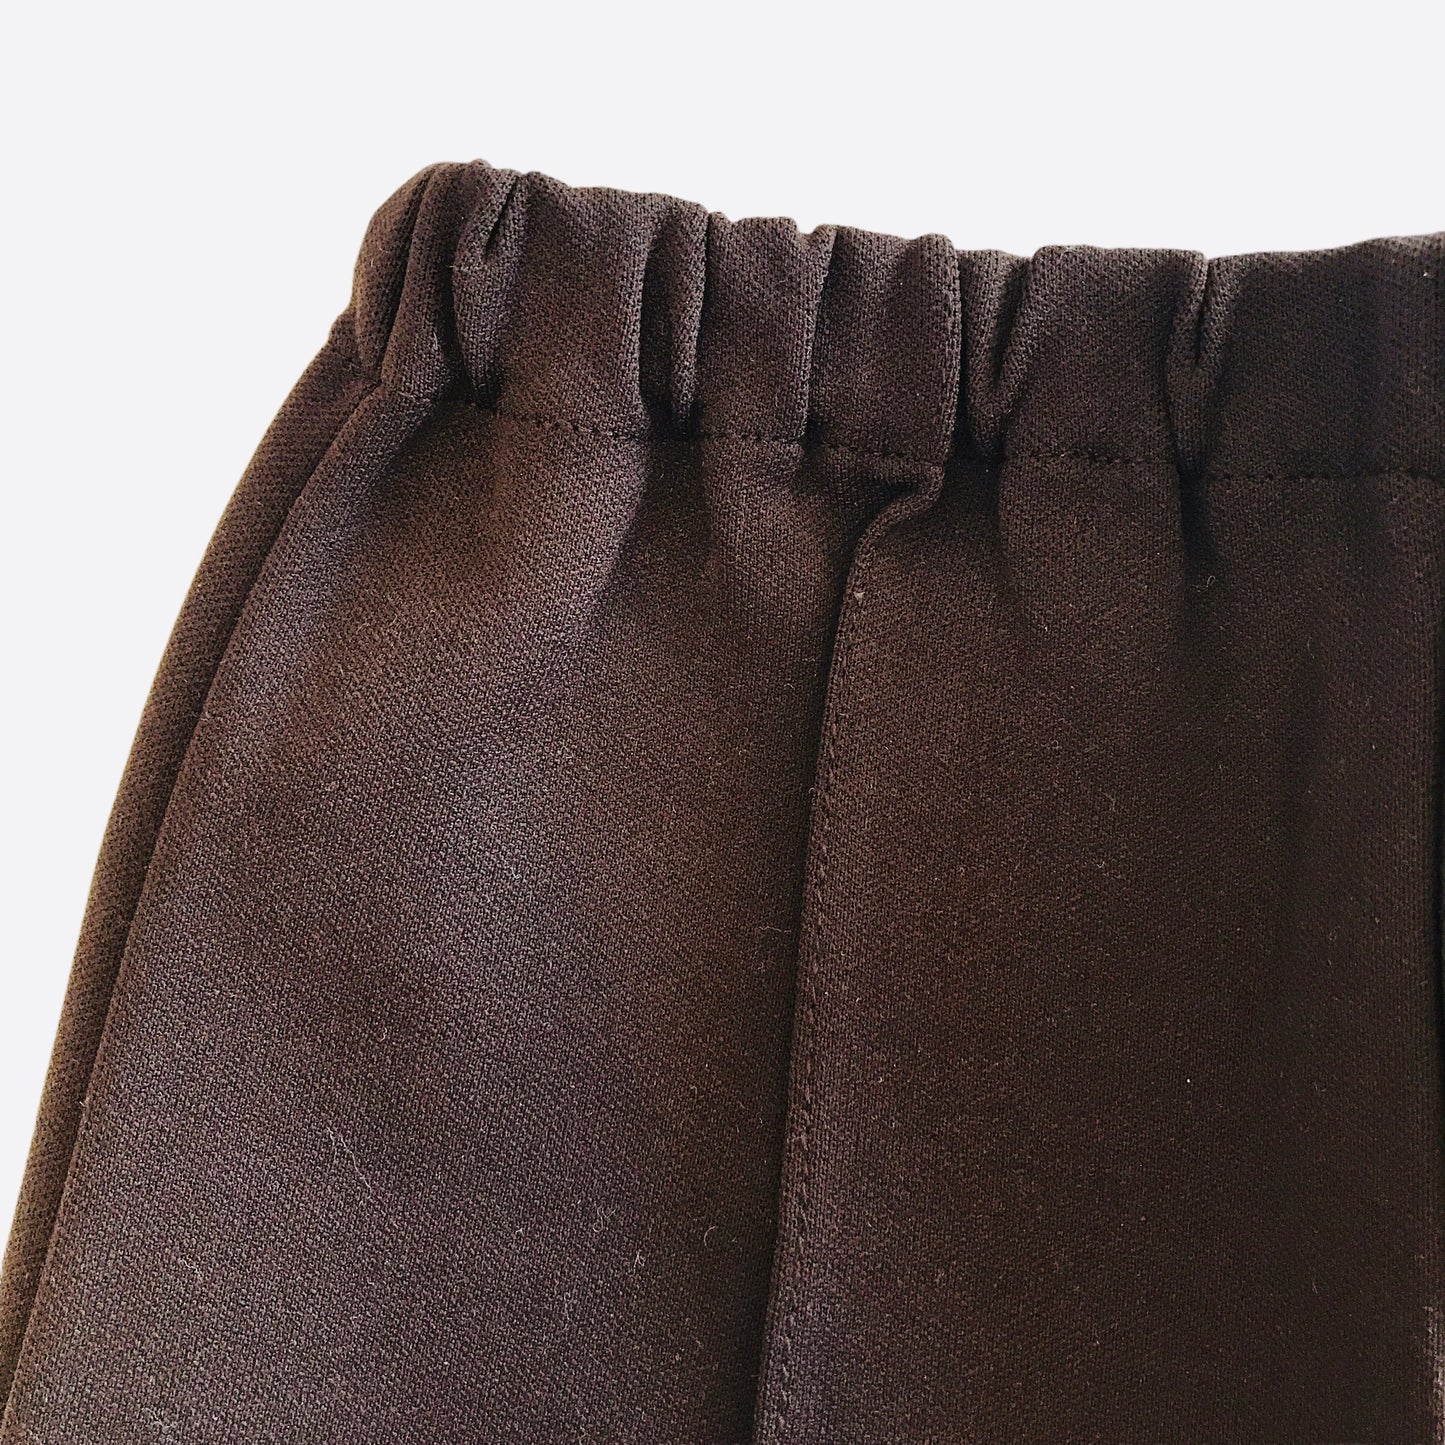 Load image into Gallery viewer, Vintage 1960s Brown Nylon Shorts 12-18 Months
